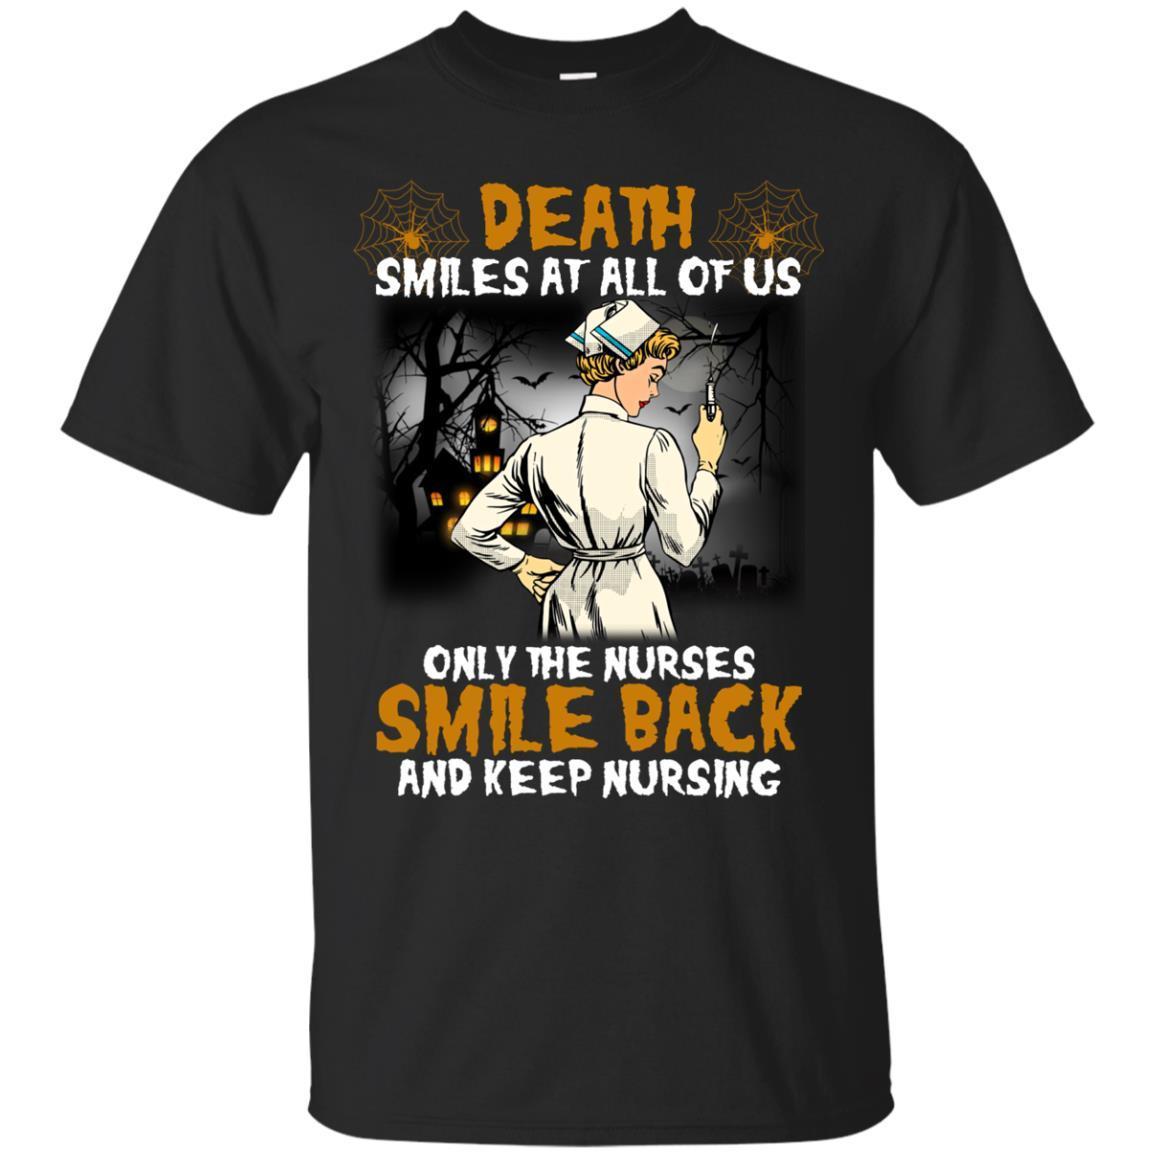  Death Smiles At All Of Us Only The Nurses Smile Back And Keep Nursing Shirts